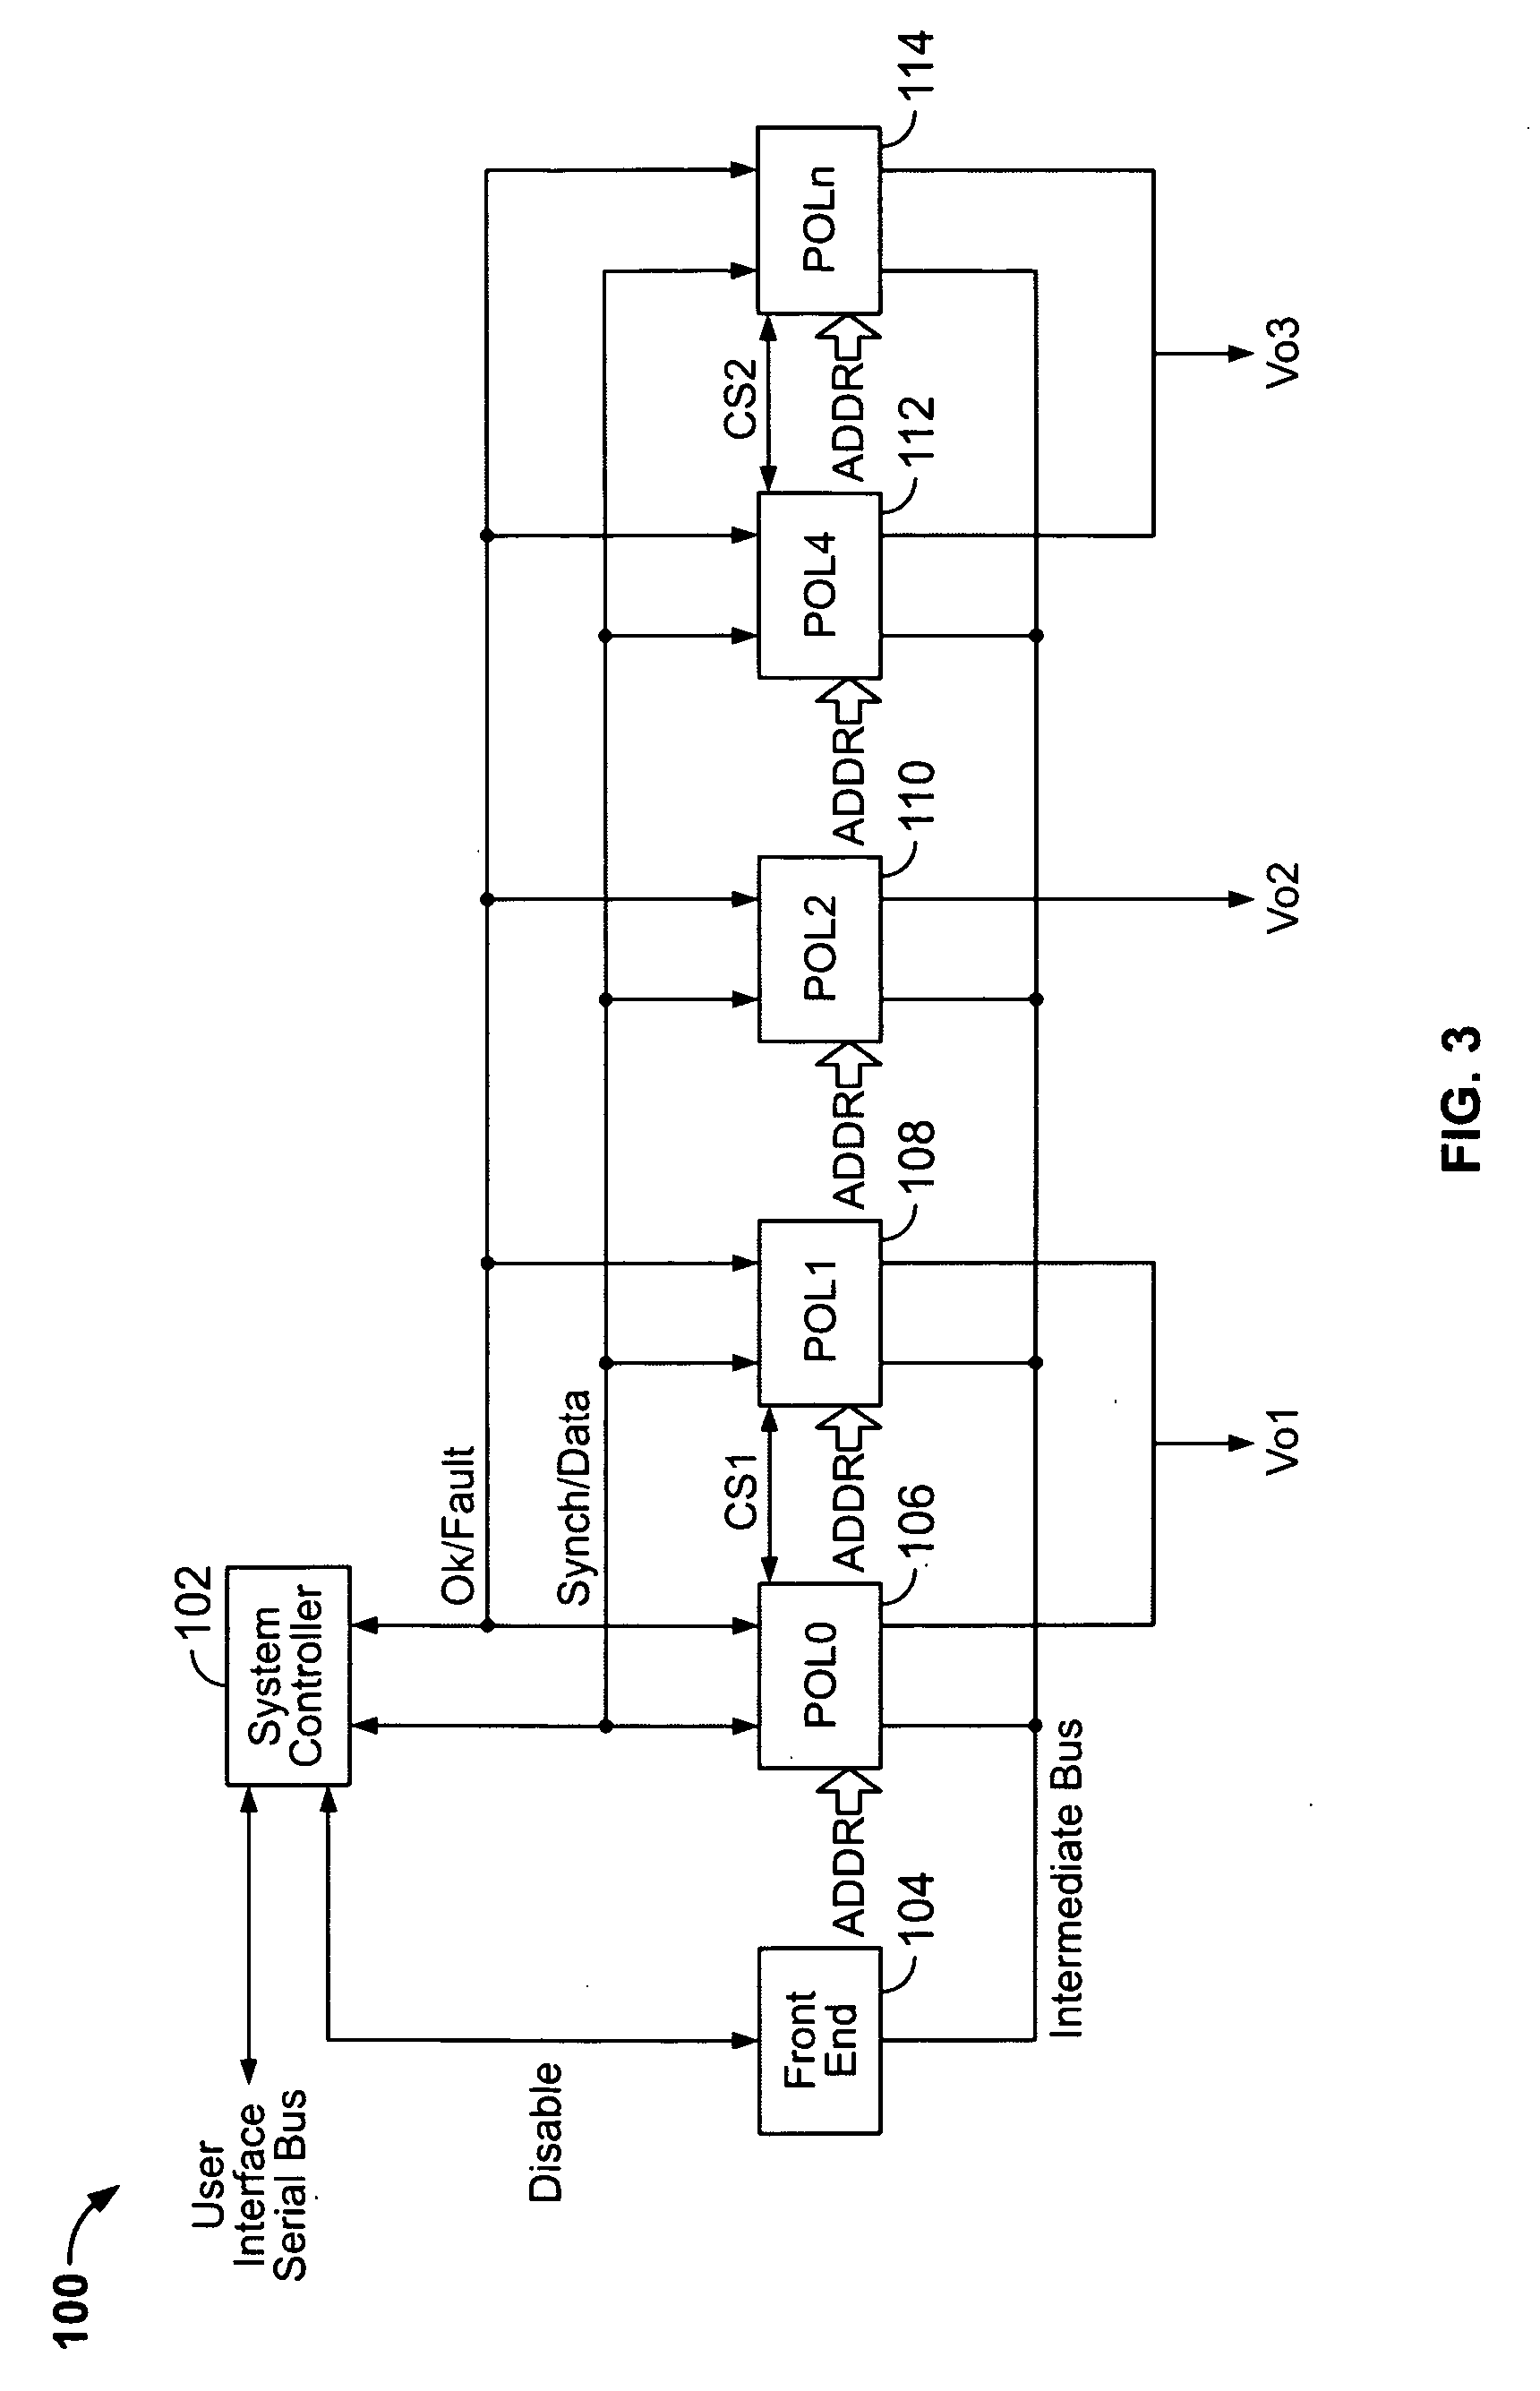 Method and system for controlling an array of point-of-load regulators and auxiliary devices